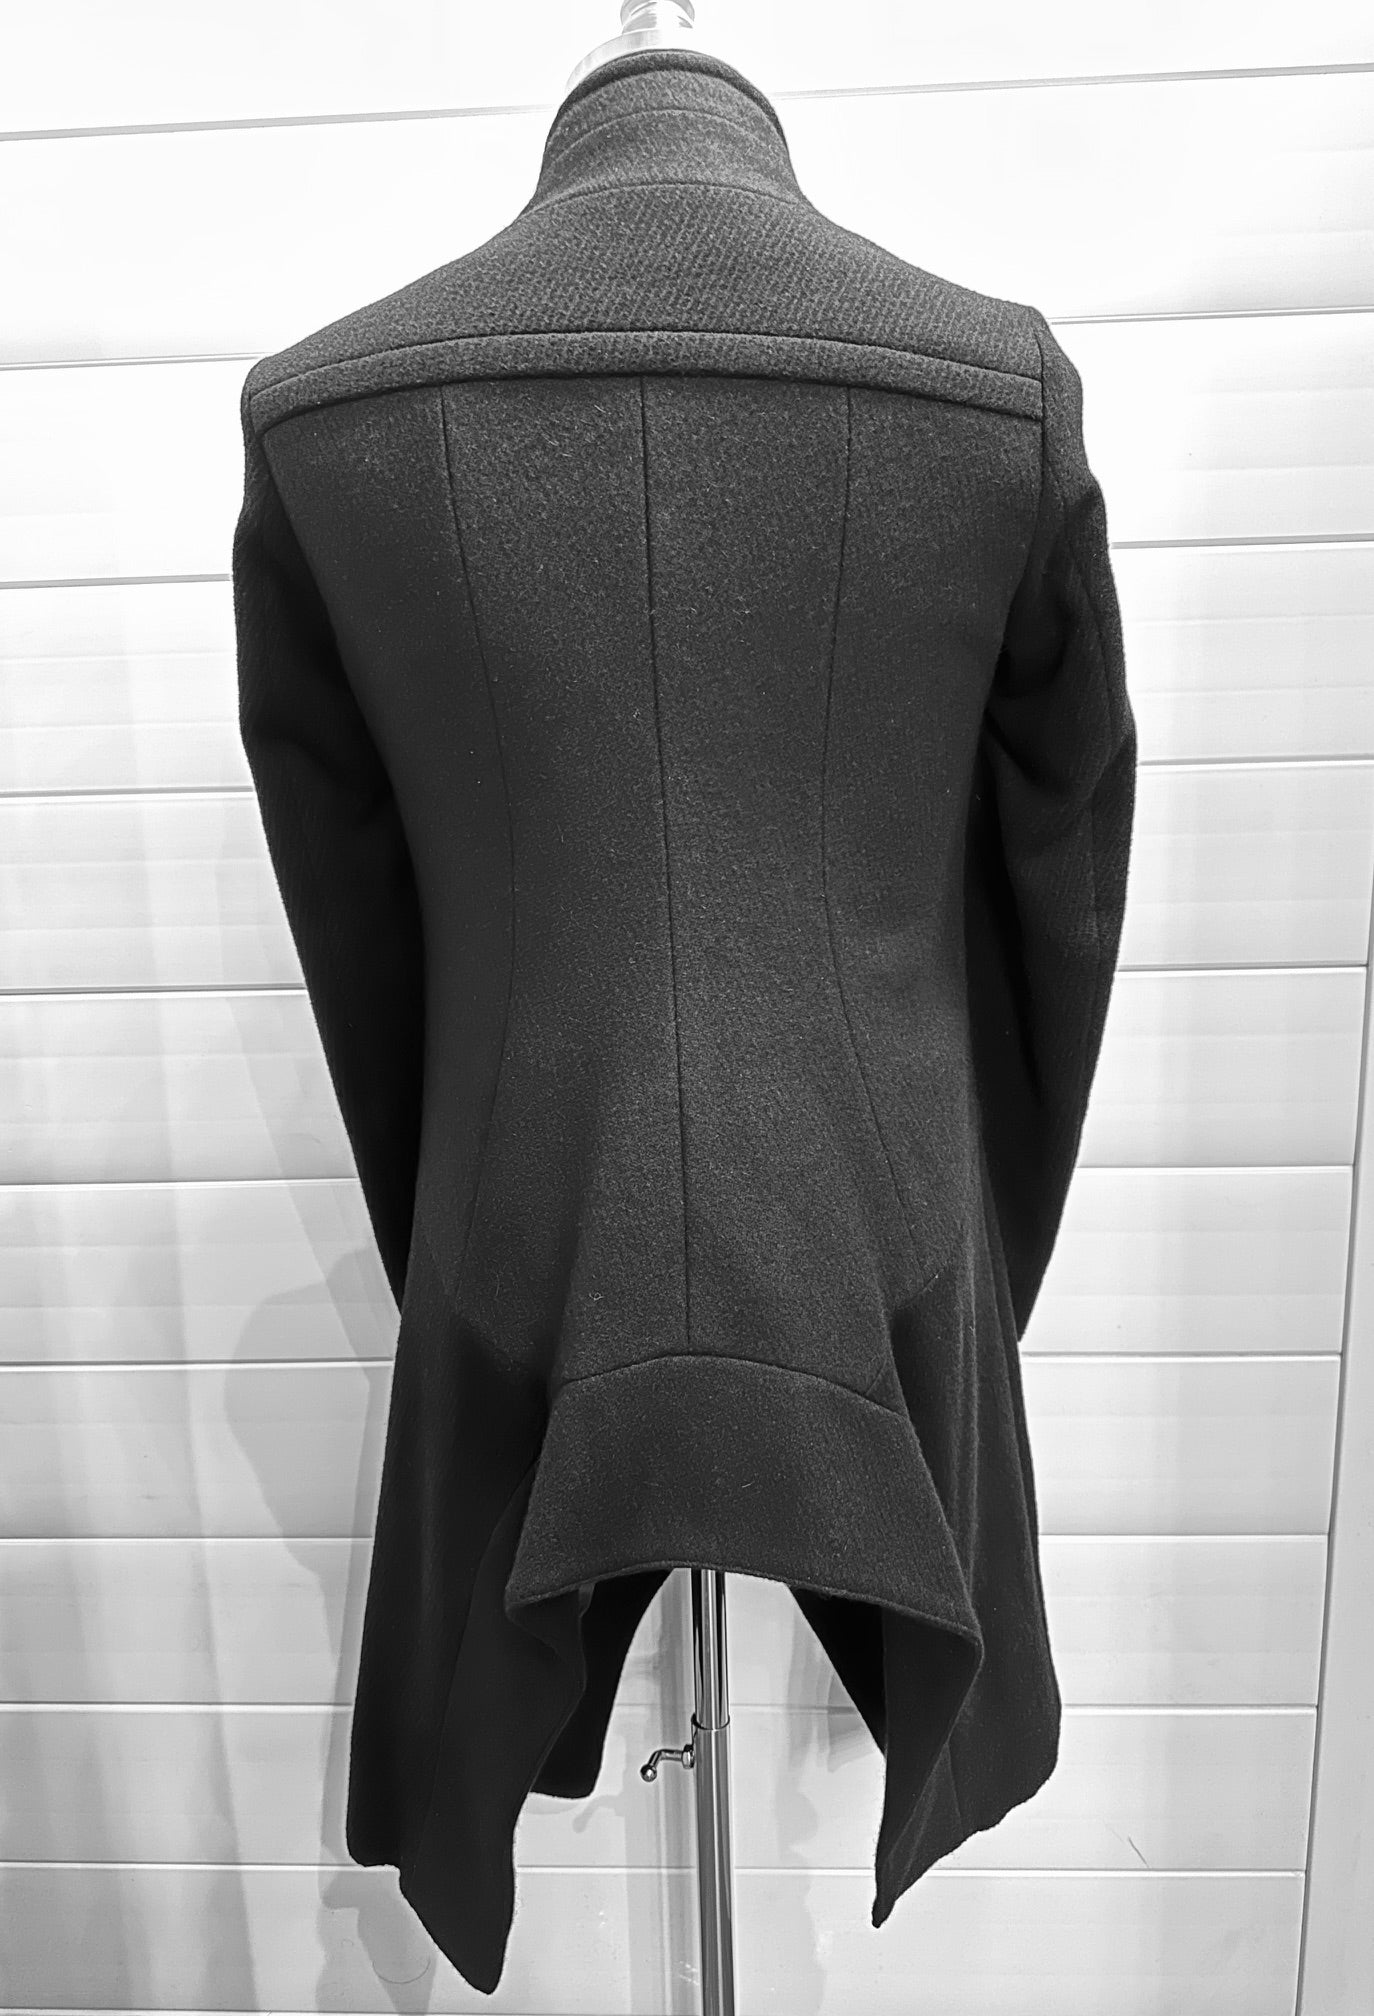 Black Wool Blend Asymmetrical Double Breasted Button Closure Paneled Riding Coat by Julius